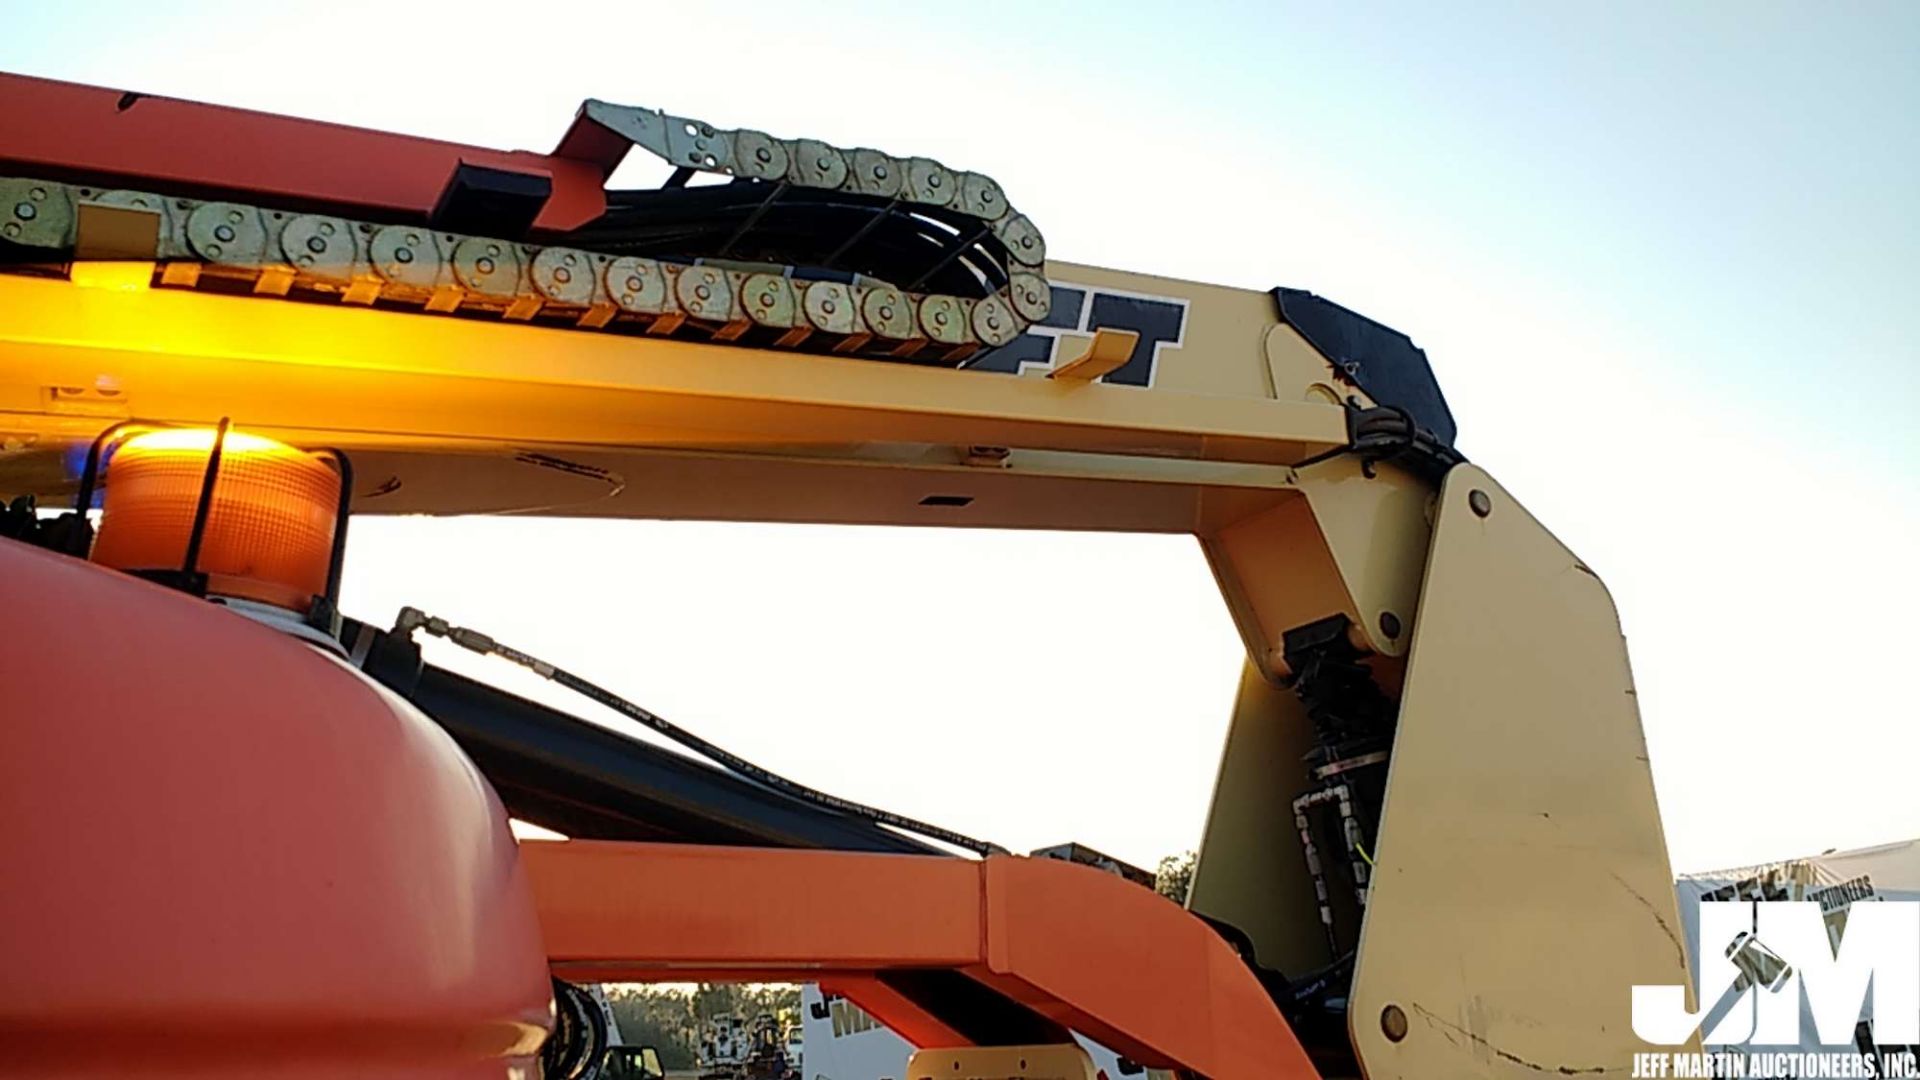 2013 JLG 600AJ 60' 4X4 ARTICULATED BOOM LIFT SN: 0300165579 - Image 16 of 27